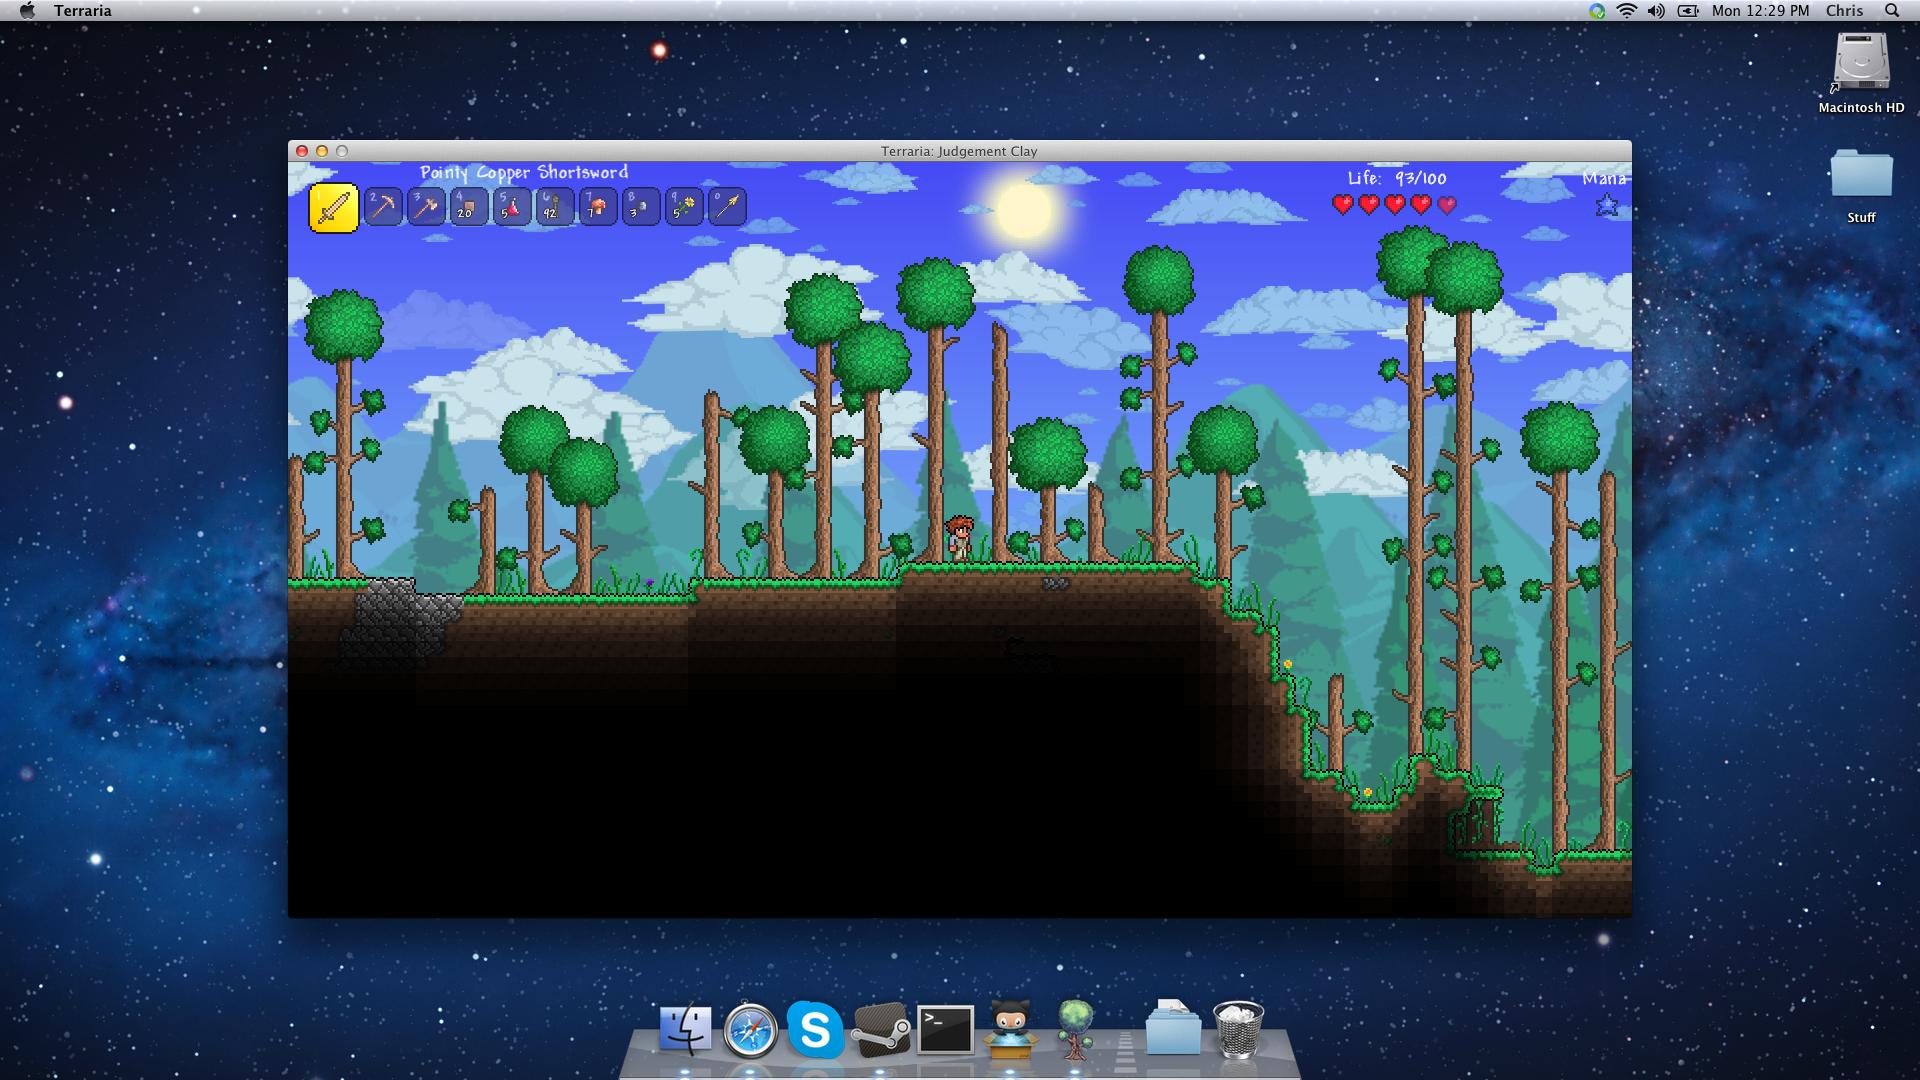 Download terraria full version for free